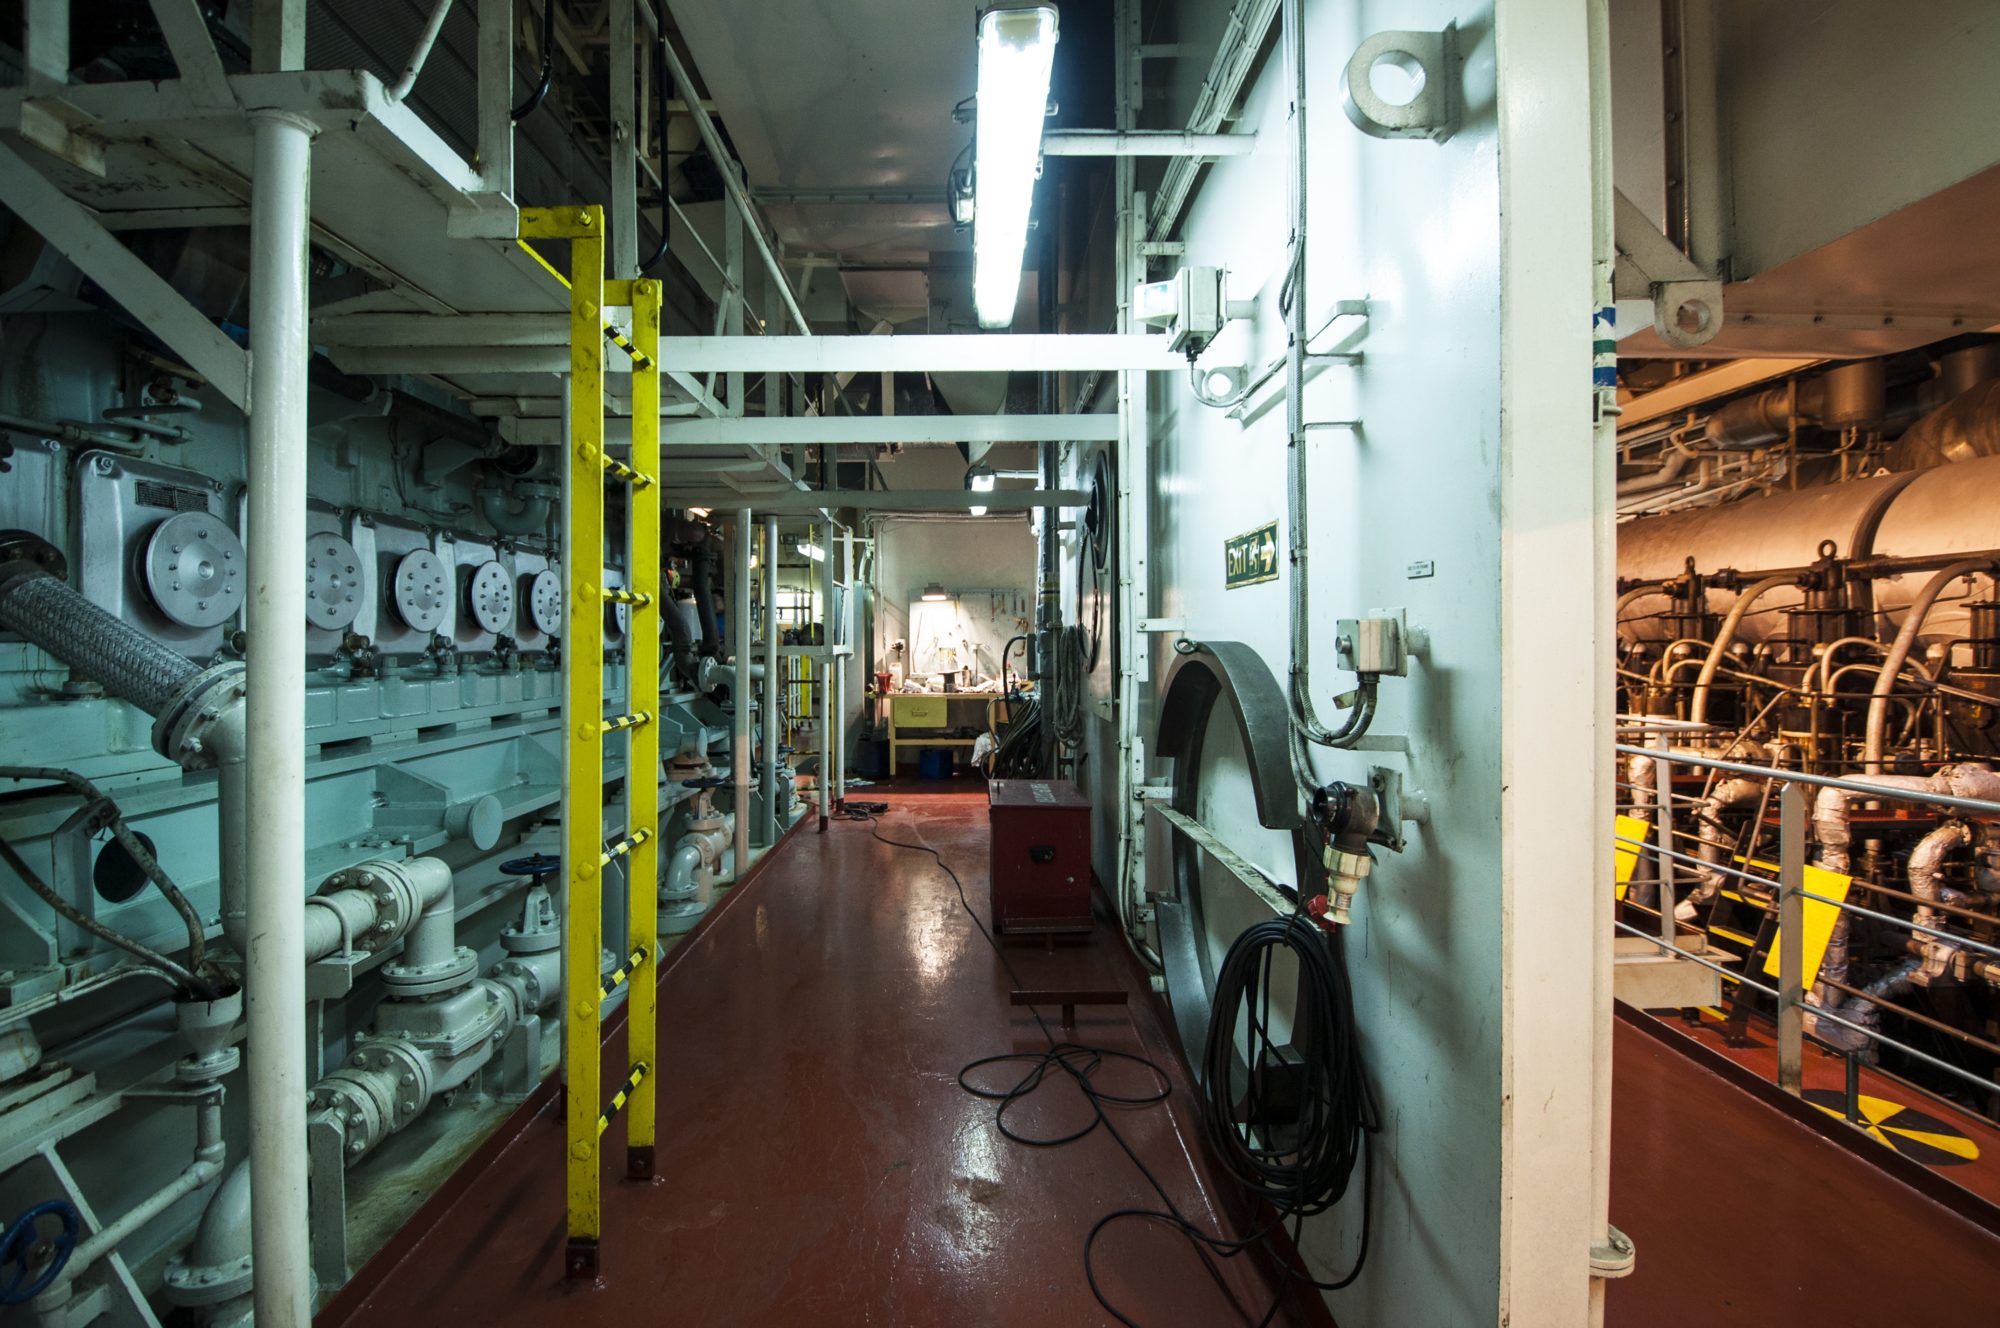 image of cargo ship bridge room; neon yellow ladder, caution signals and aquamarine pipes and walls visible